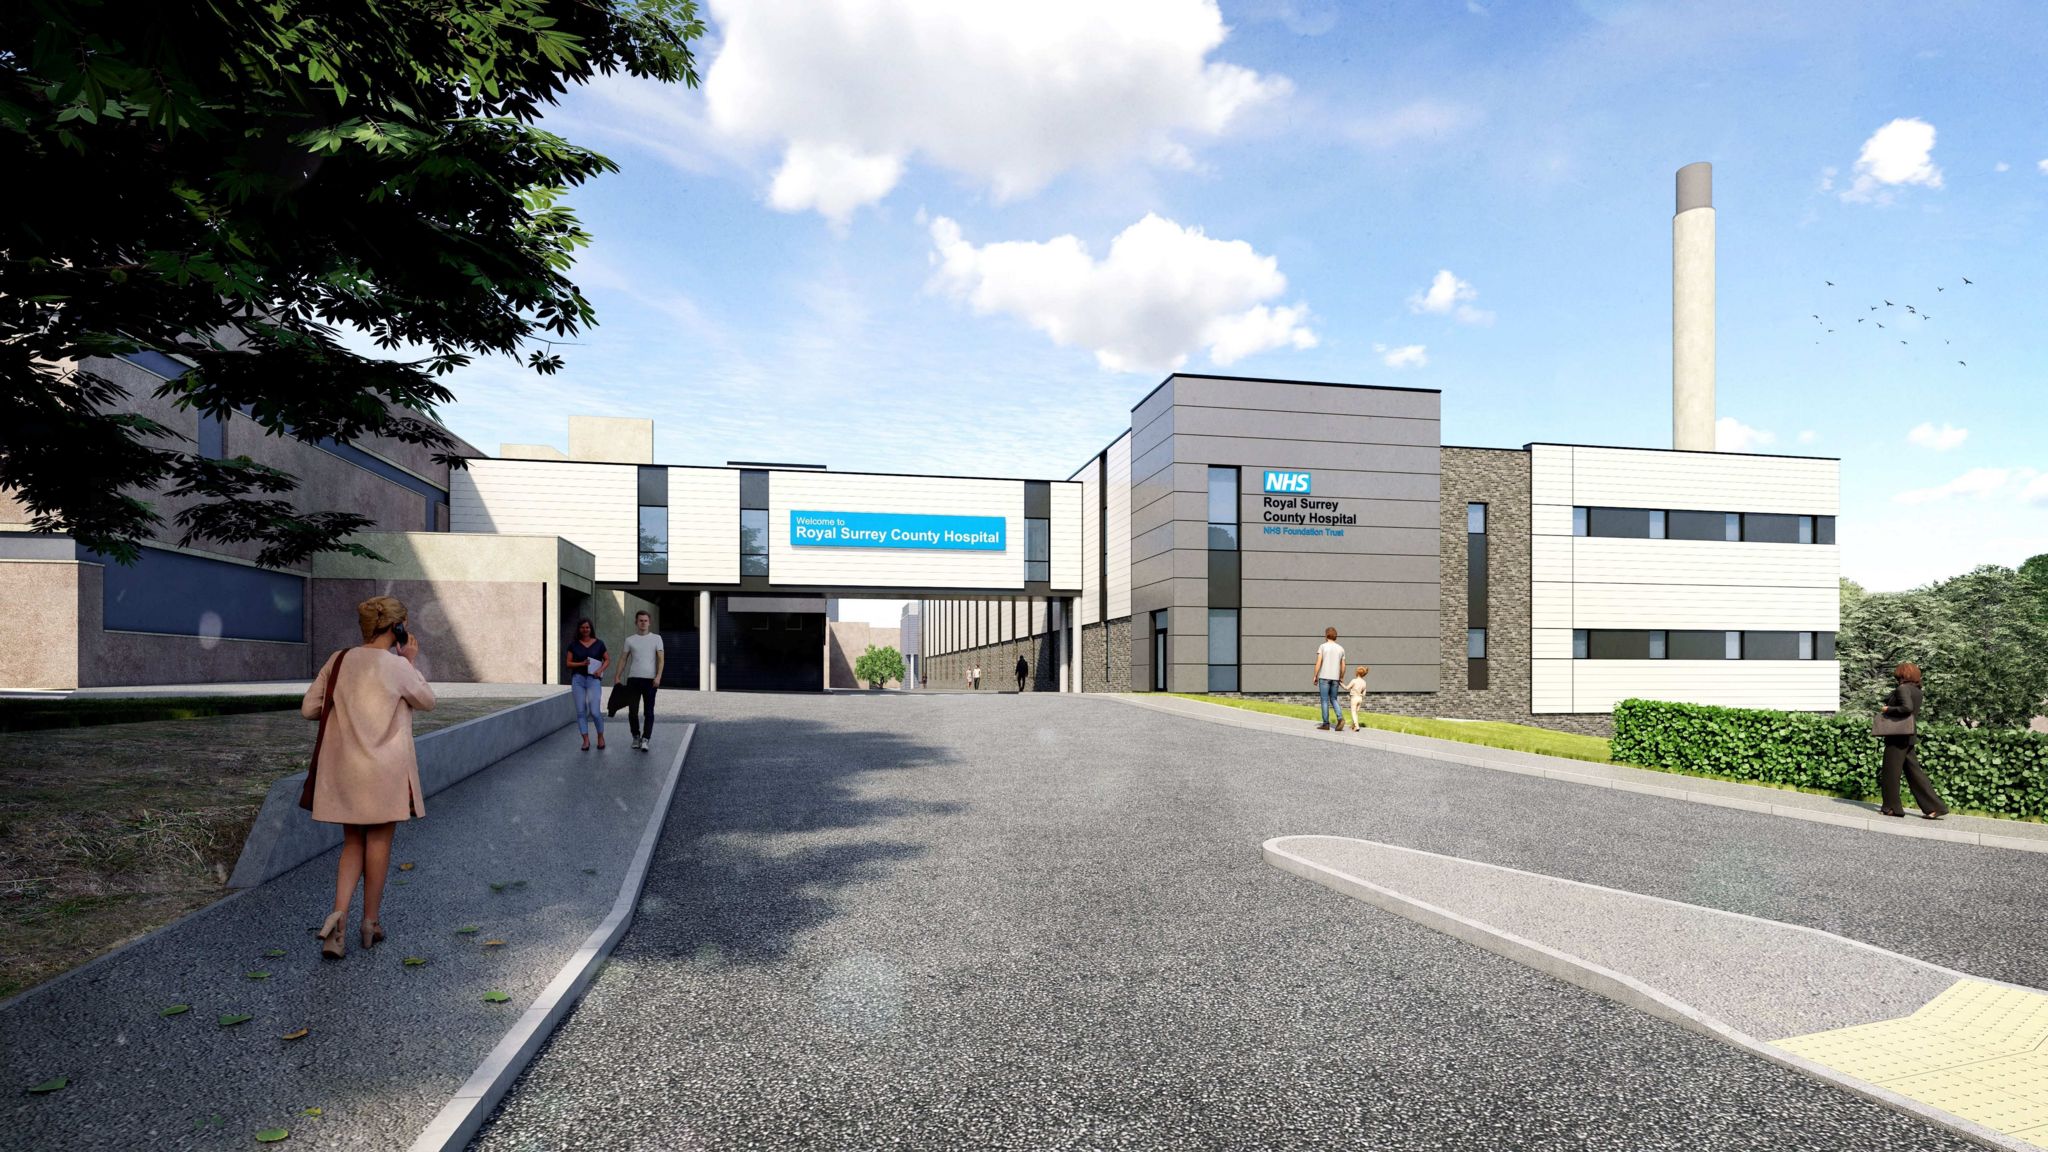 An artist's impression of a new hospital building